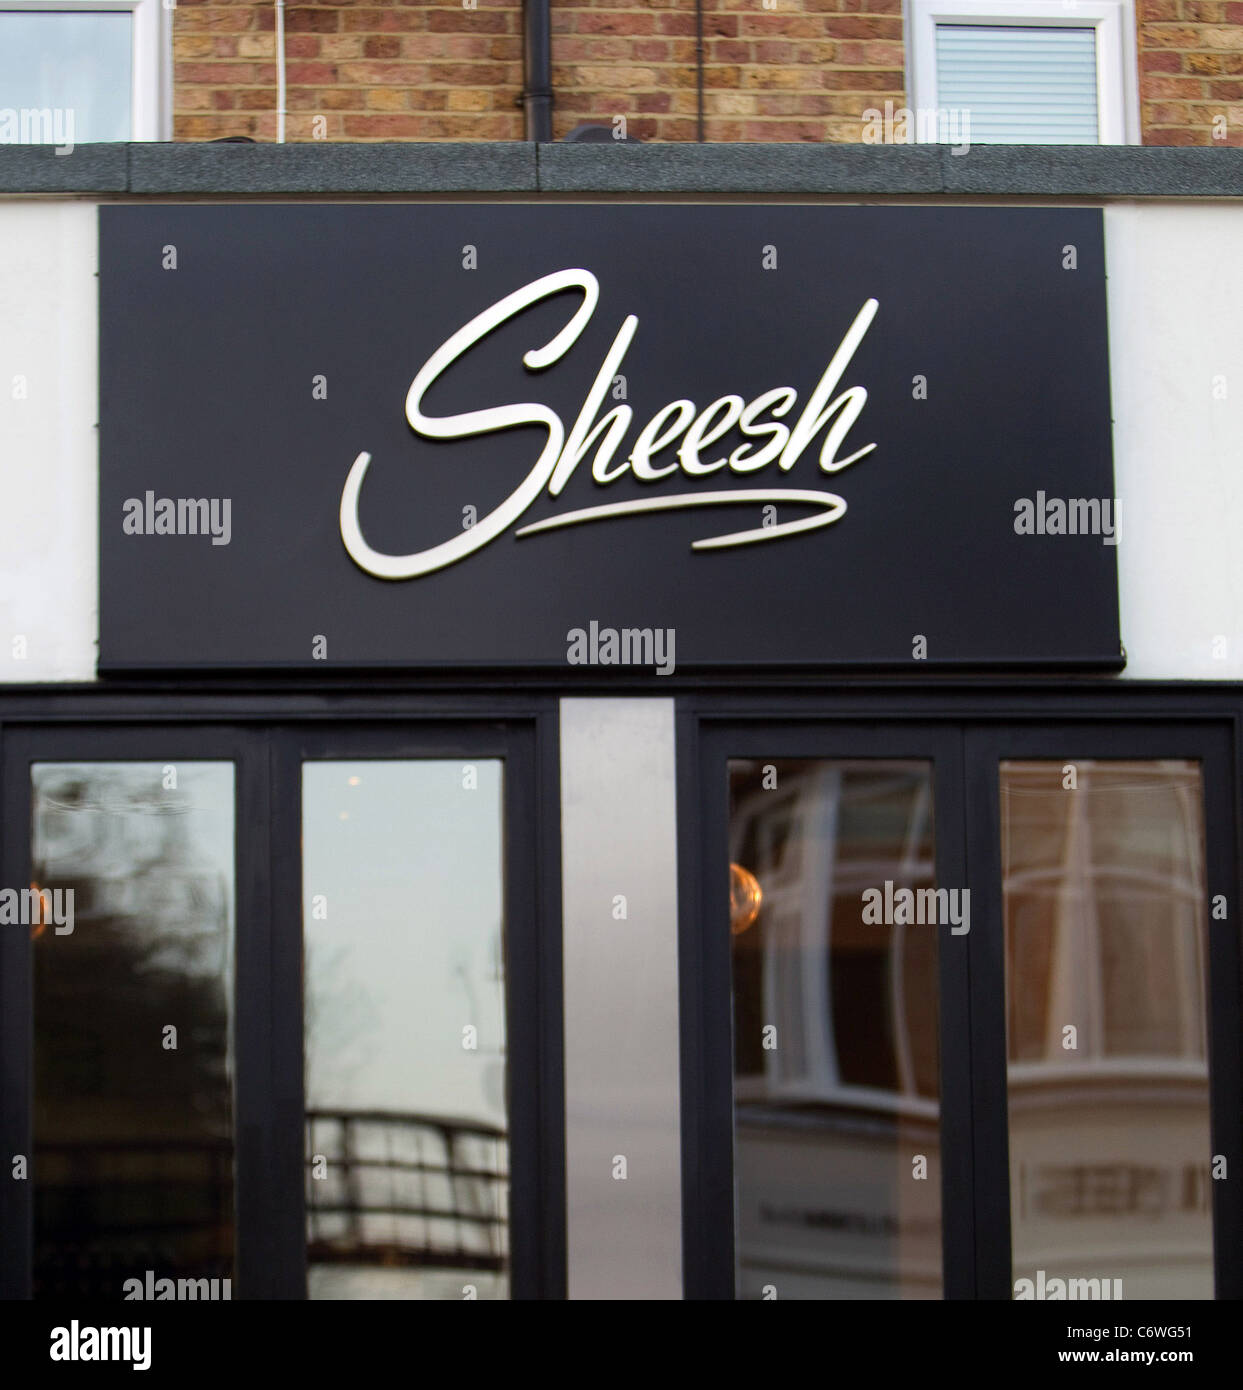 Sheesh restaurant in Buckhurst Hill where Jack Tweed and Chanelle Hayes enjoyed dinner together Essex, England - 16.04.10 Stock Photo